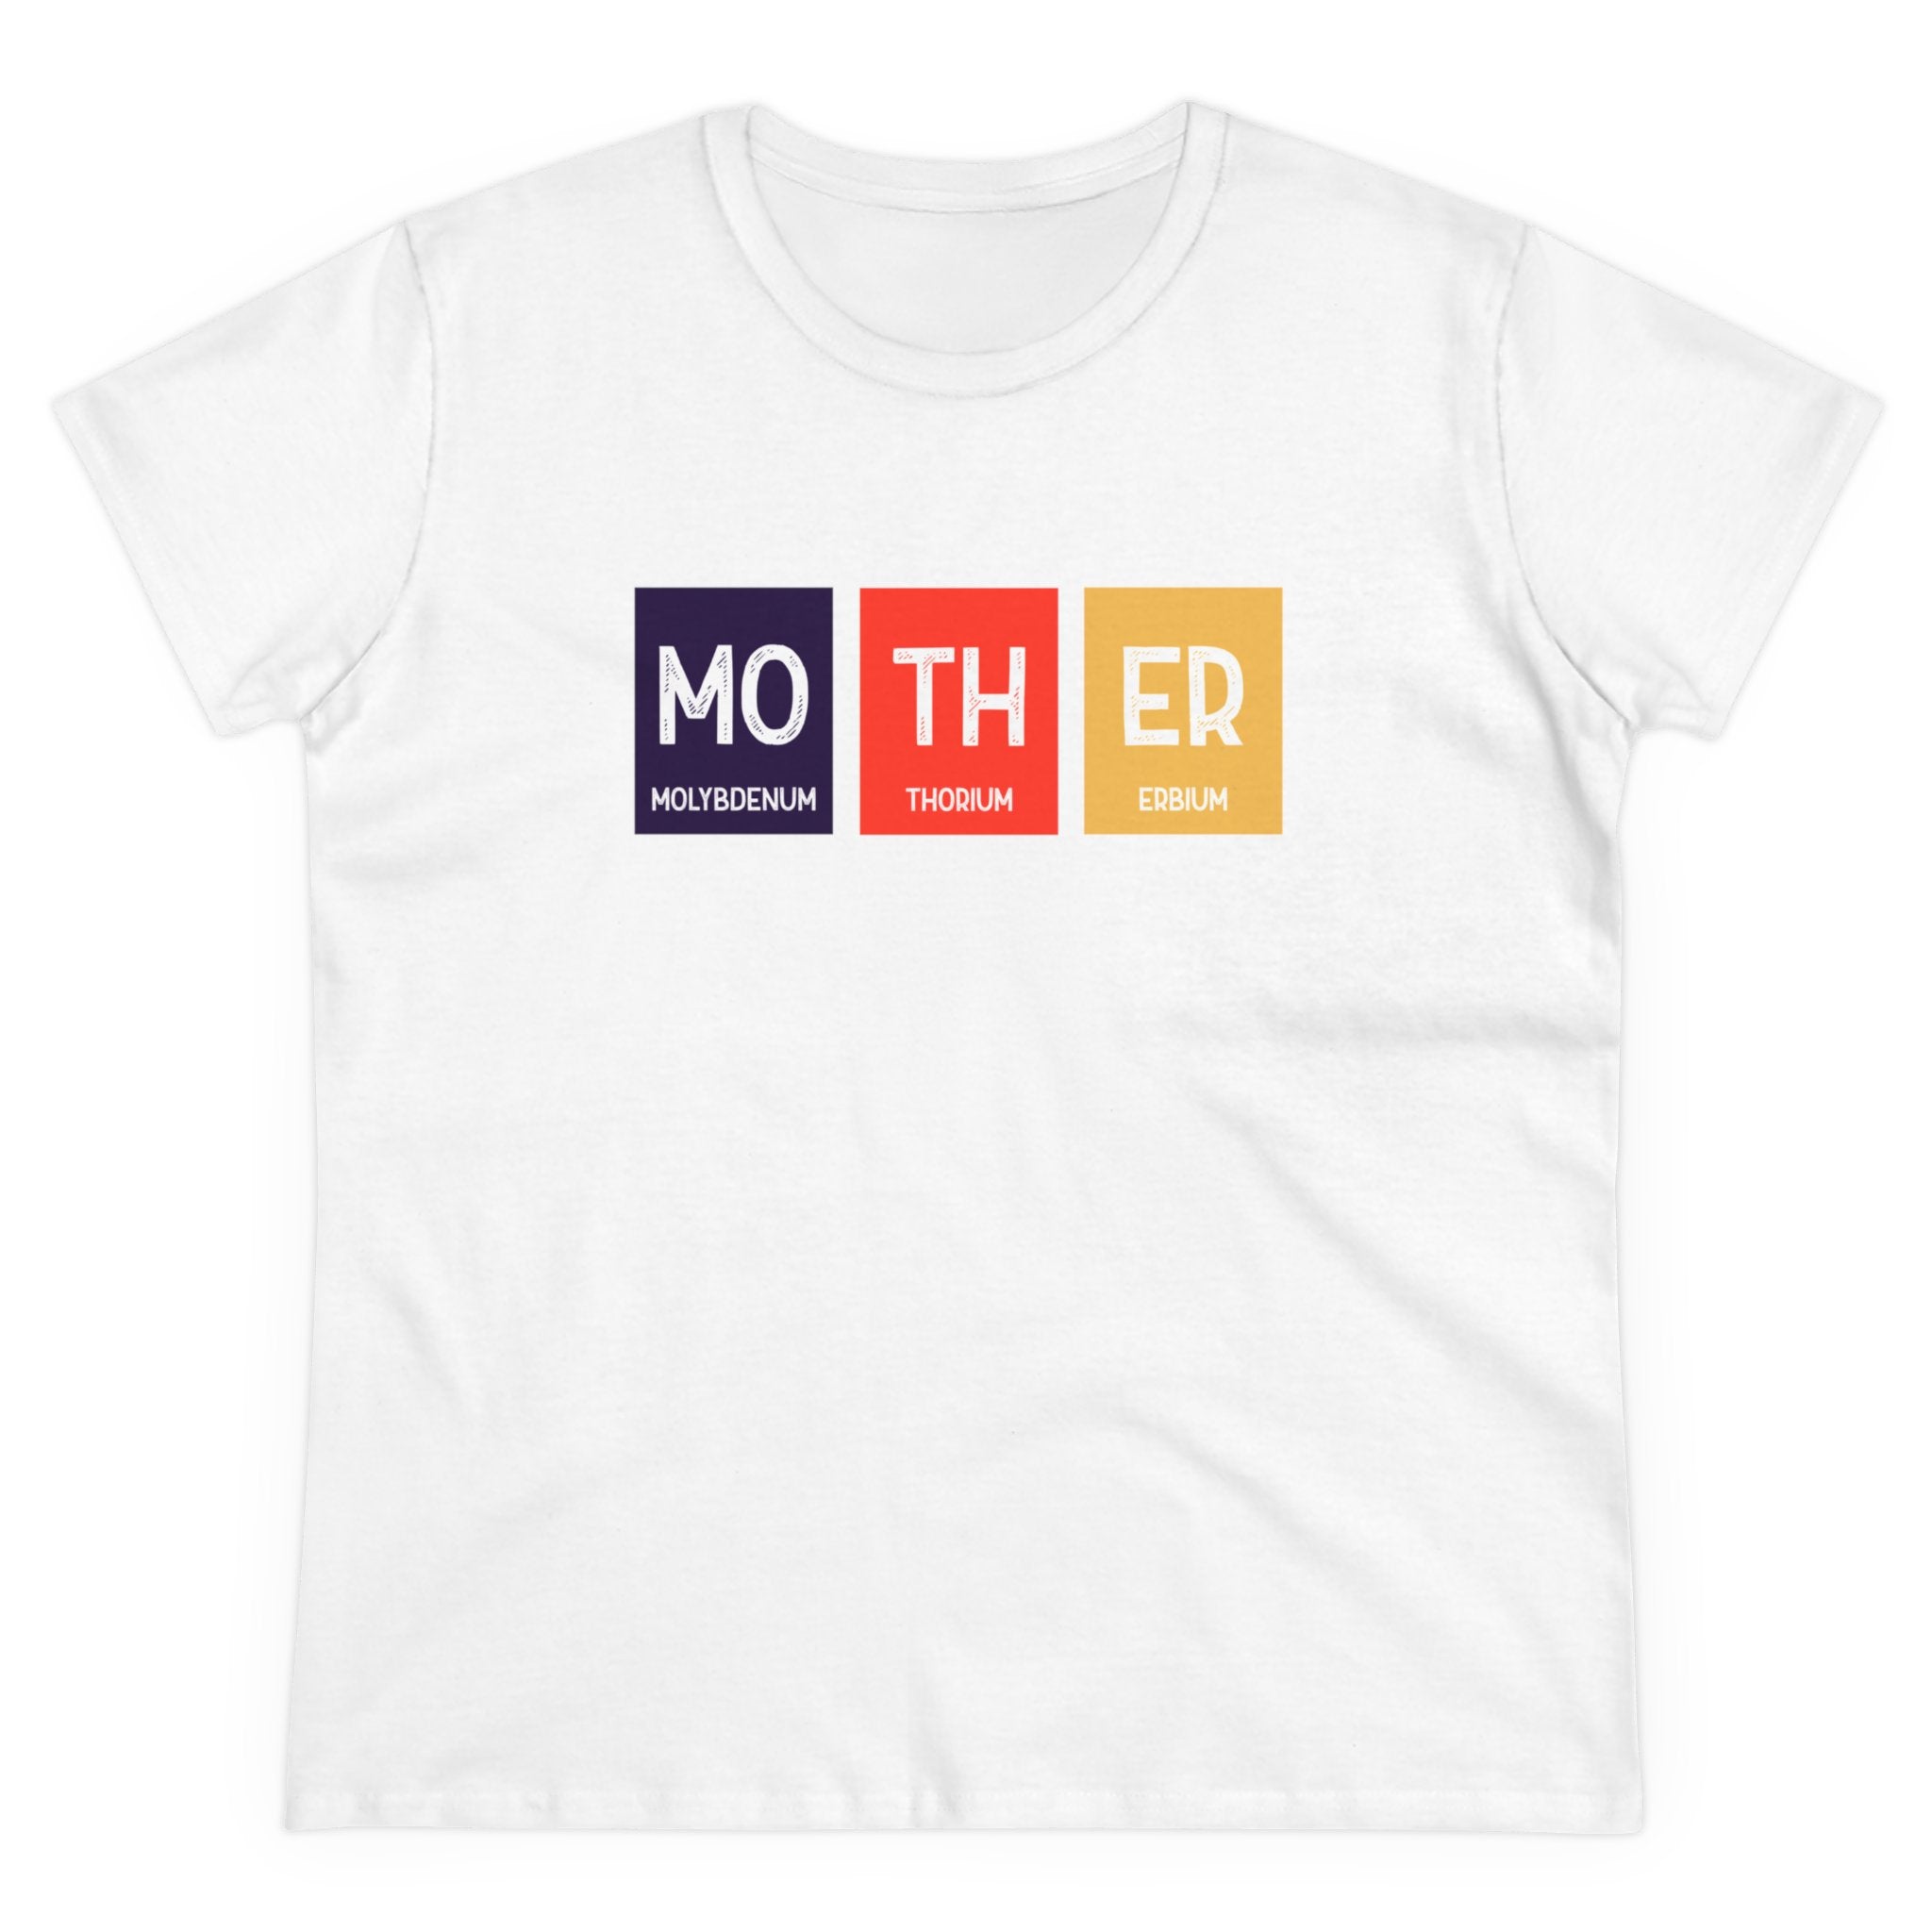 An eco-friendly white Mo-TH-ER - Women's Tee features "MOTHER" spelled out using periodic table elements Molybdenum (Mo), Thorium (Th), and Erbium (Er) by Mo-TH-ER designs.